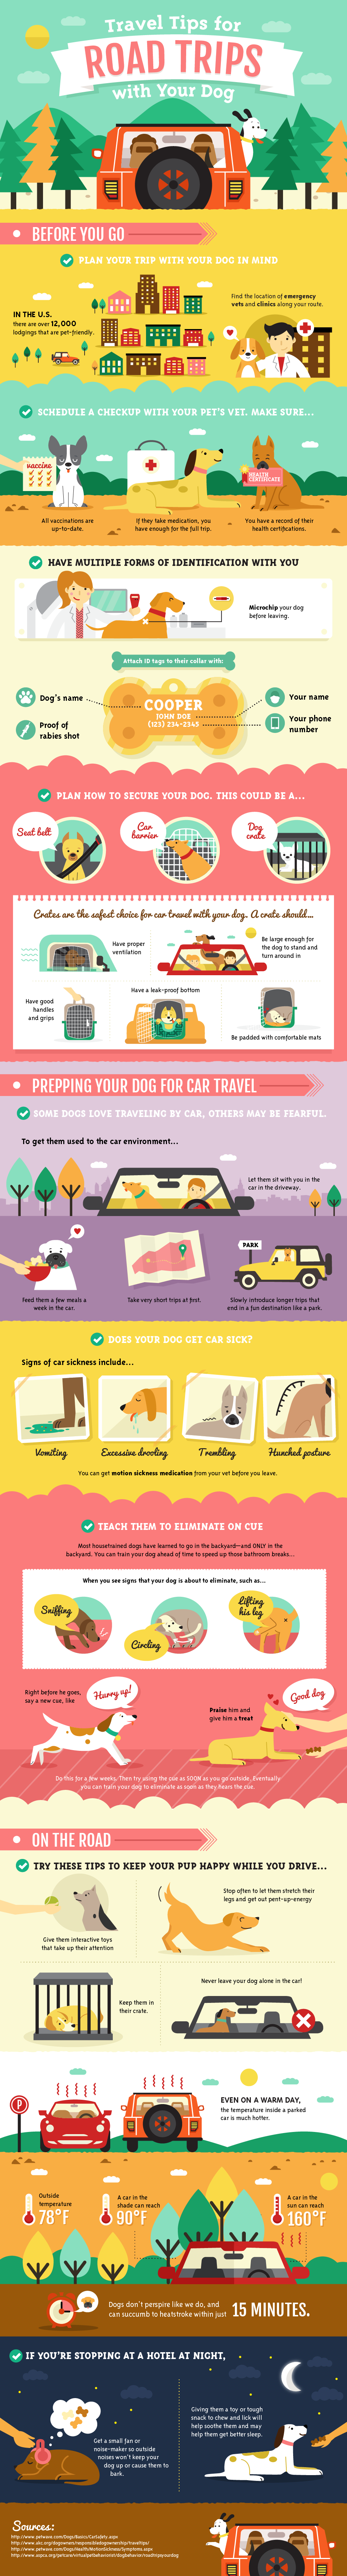 Travel Tips for Road Trips with Your Dog. An infographic by Amber Kingsley.